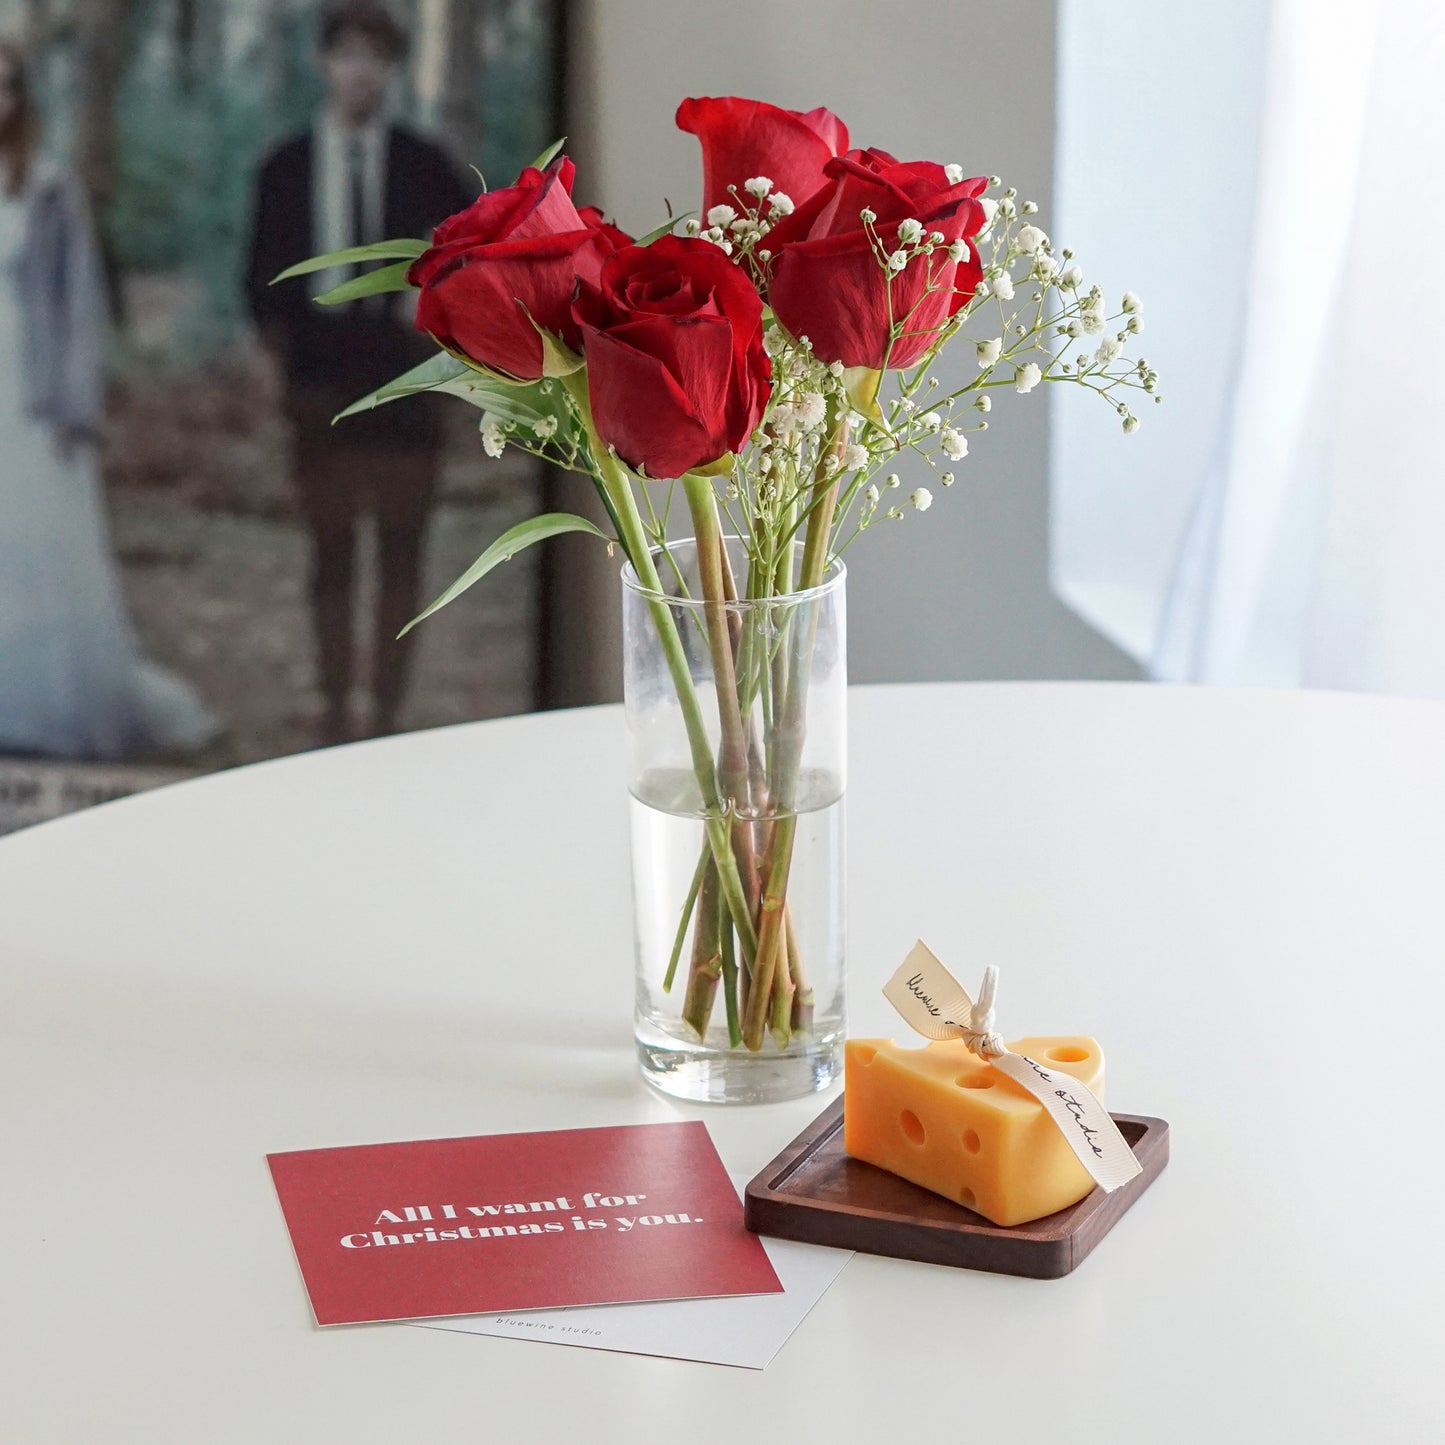 a slice of yellow cheddar cheese shape soy pillar candle on a wood square coaster, red all i want for christmas is you postcard, red roses and gypsophila in a clear cylinder vase on white round table